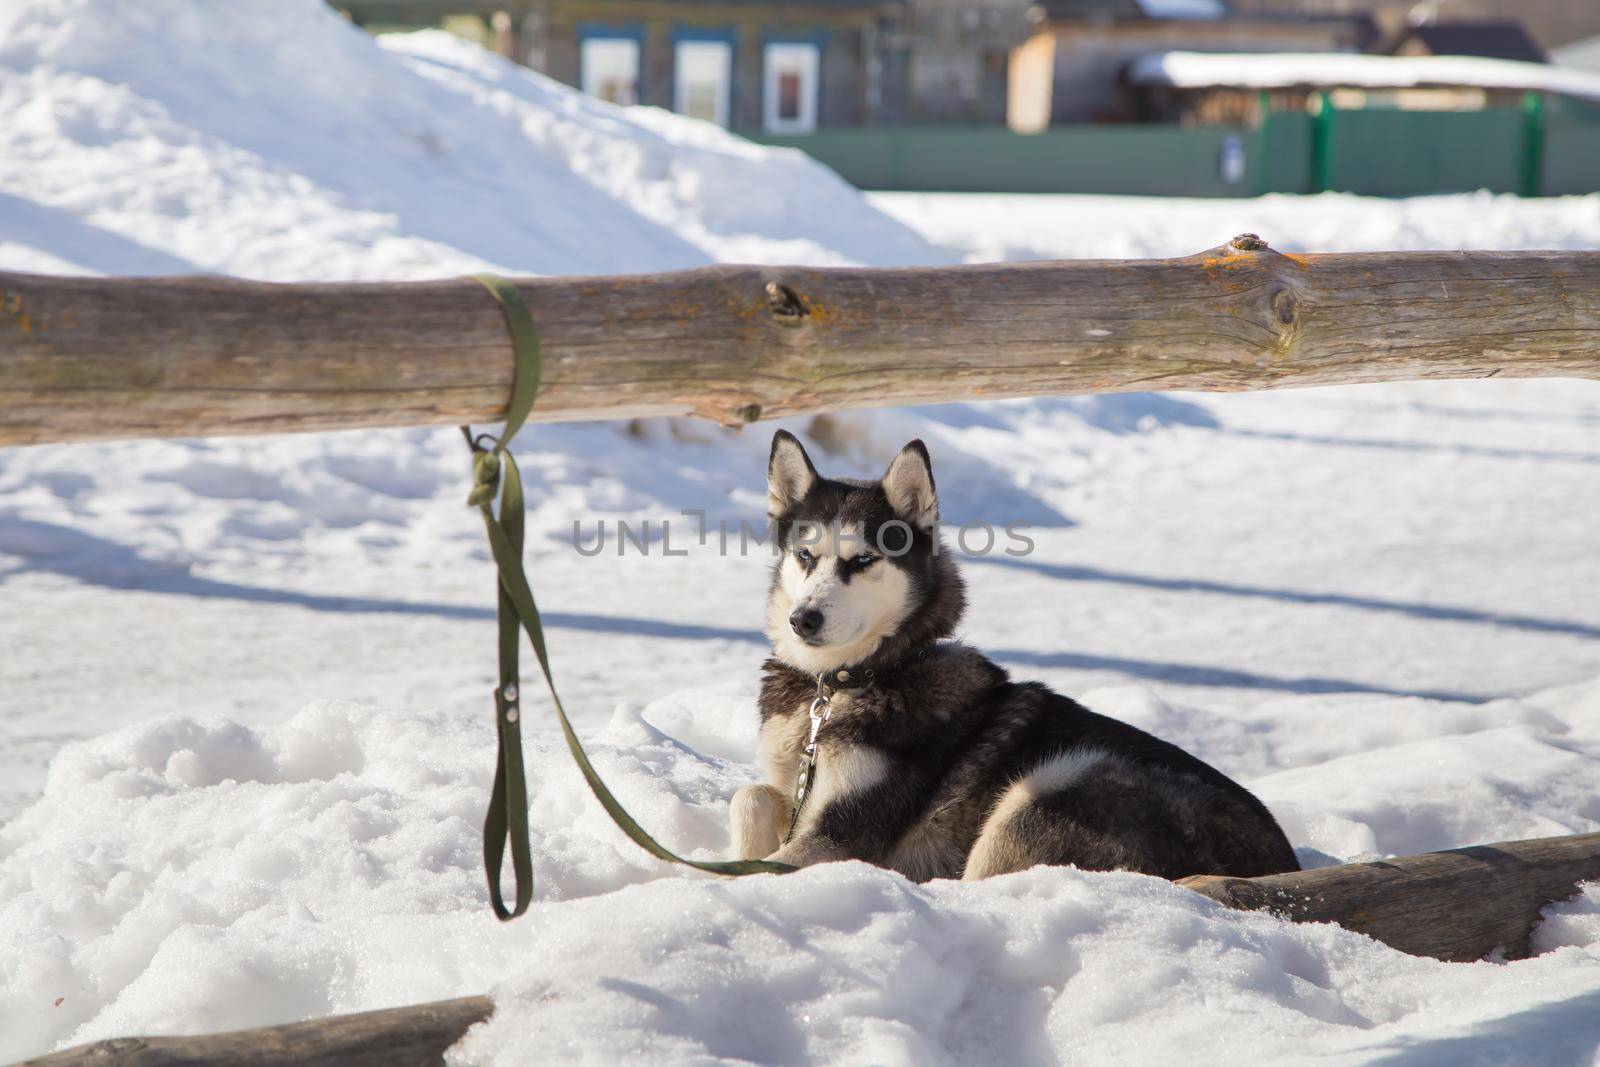 The Siberian Husky, man's faithful friend, lies in the snow. The fearless hunter dog is waiting for its owner. The leash is tied to a pole of a wooden fence, in the rays of the evening sun.